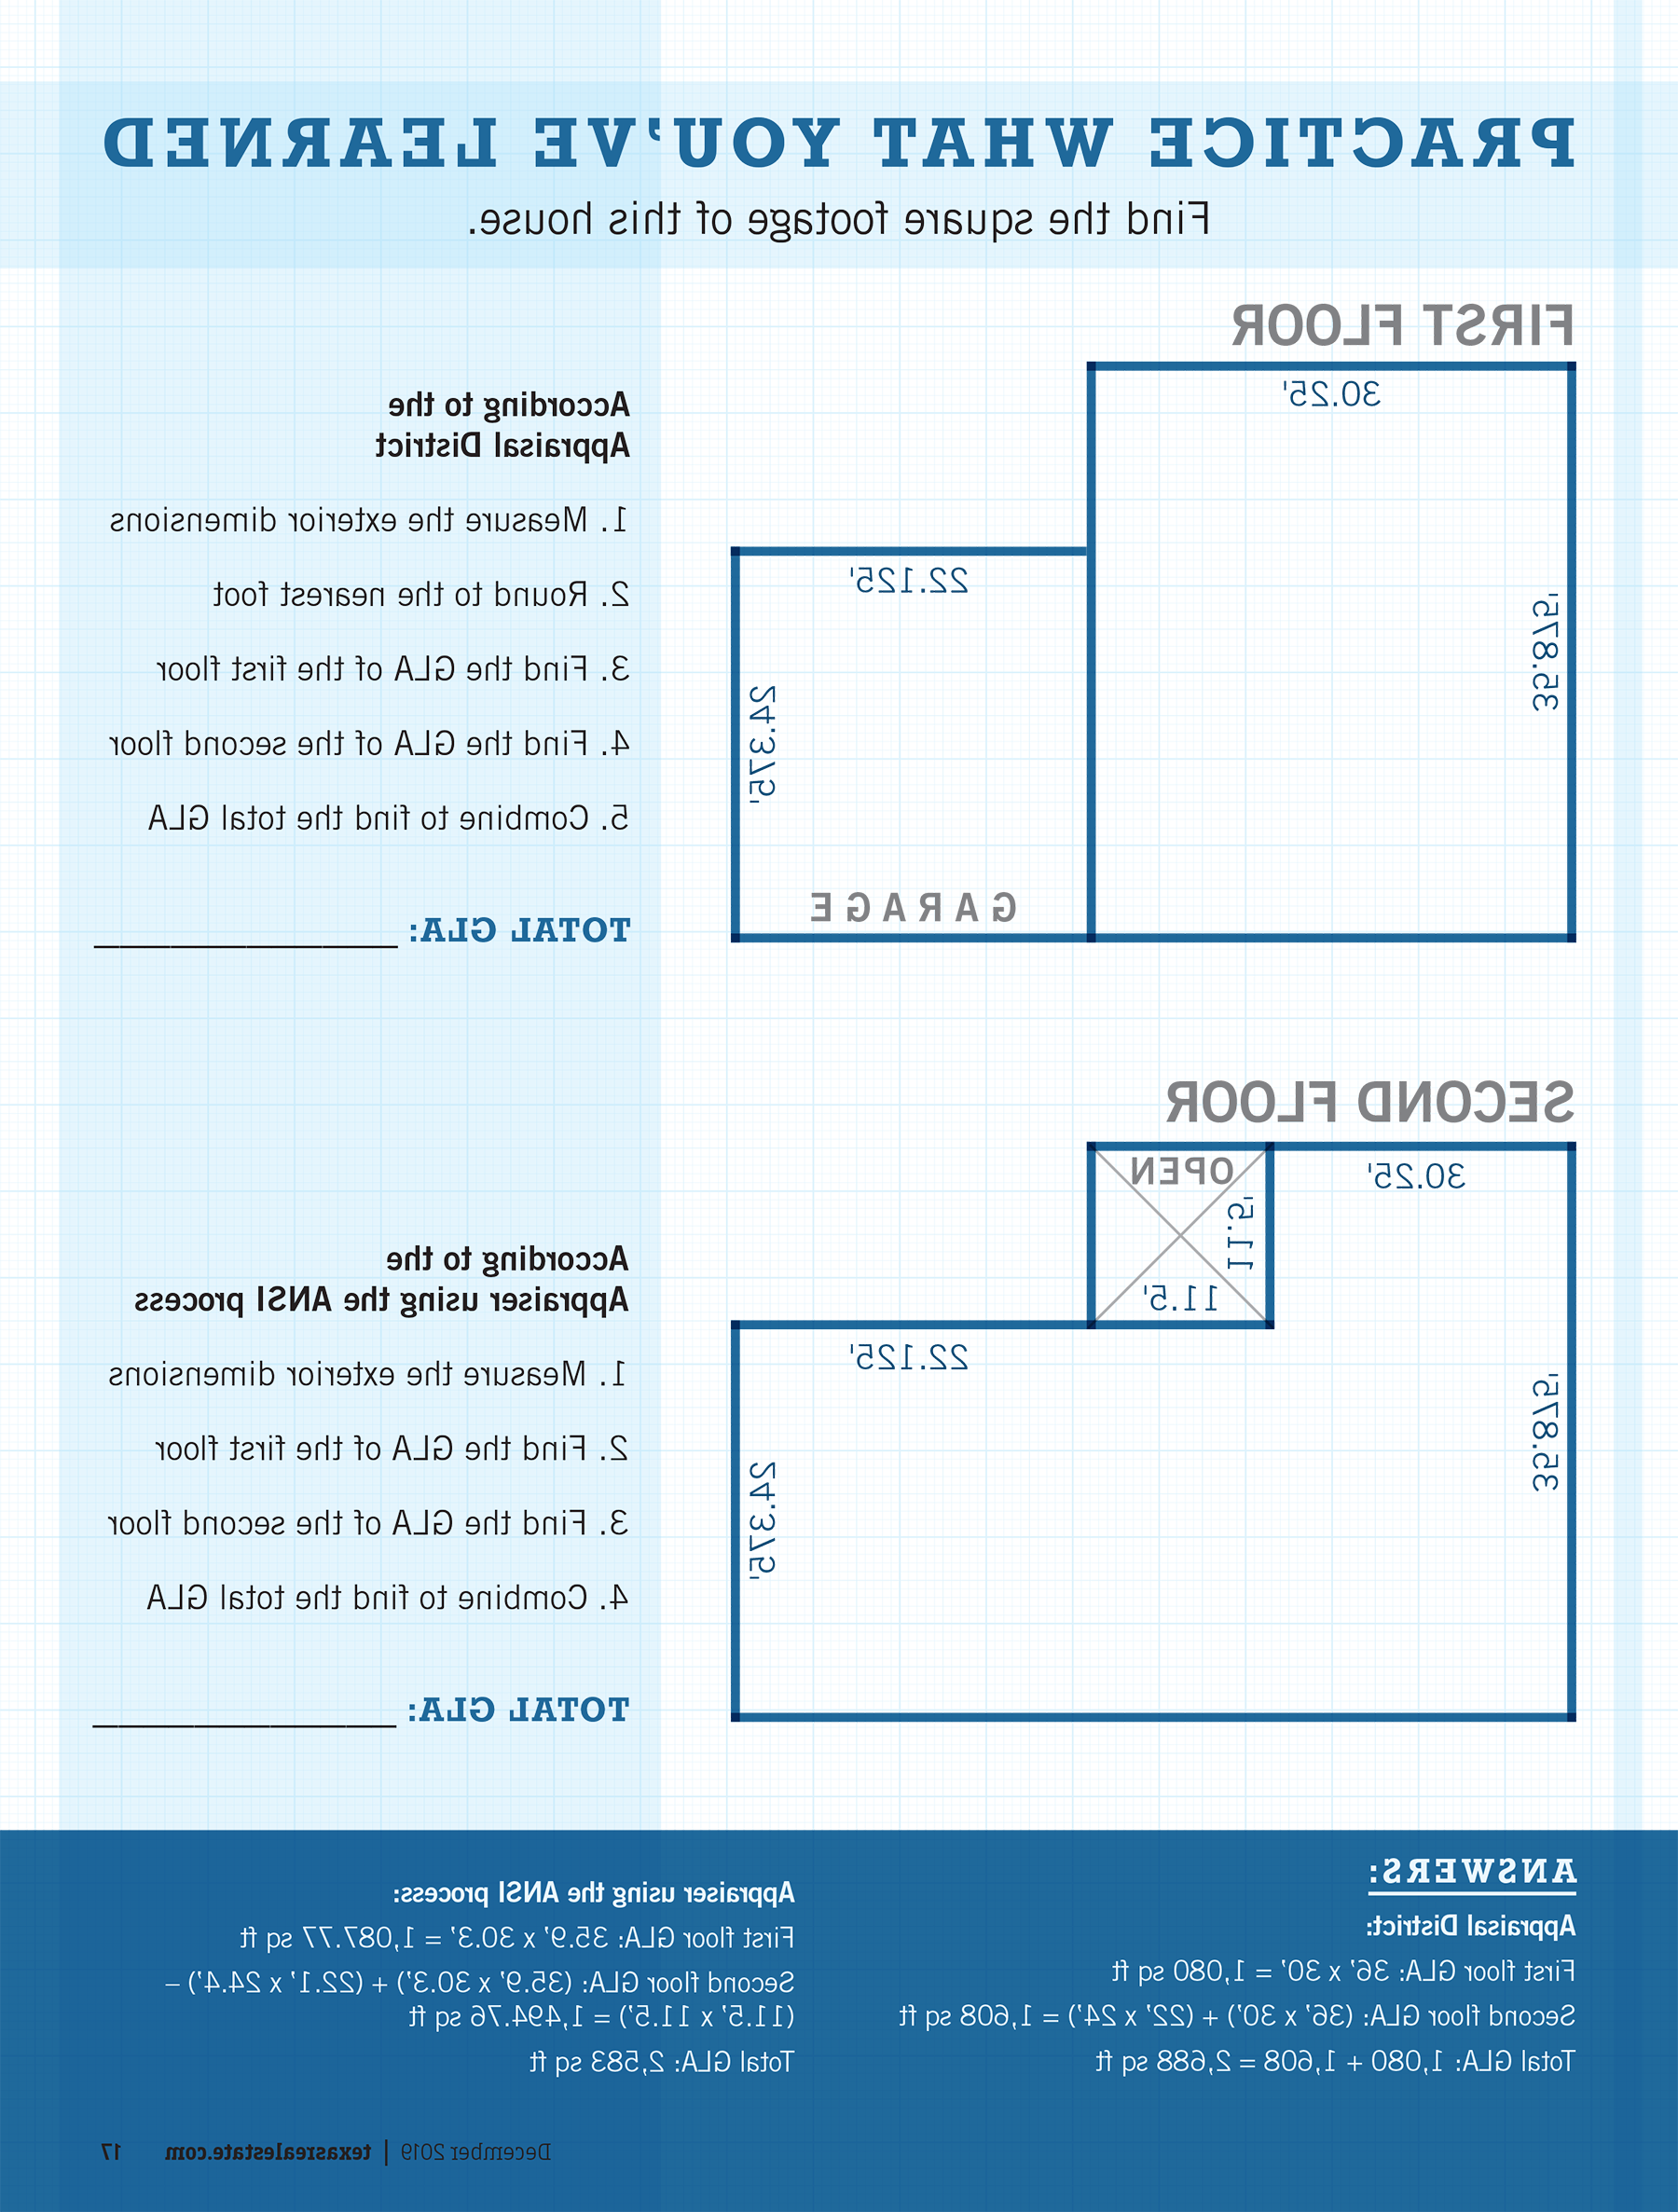 Square footage worksheet and answer key